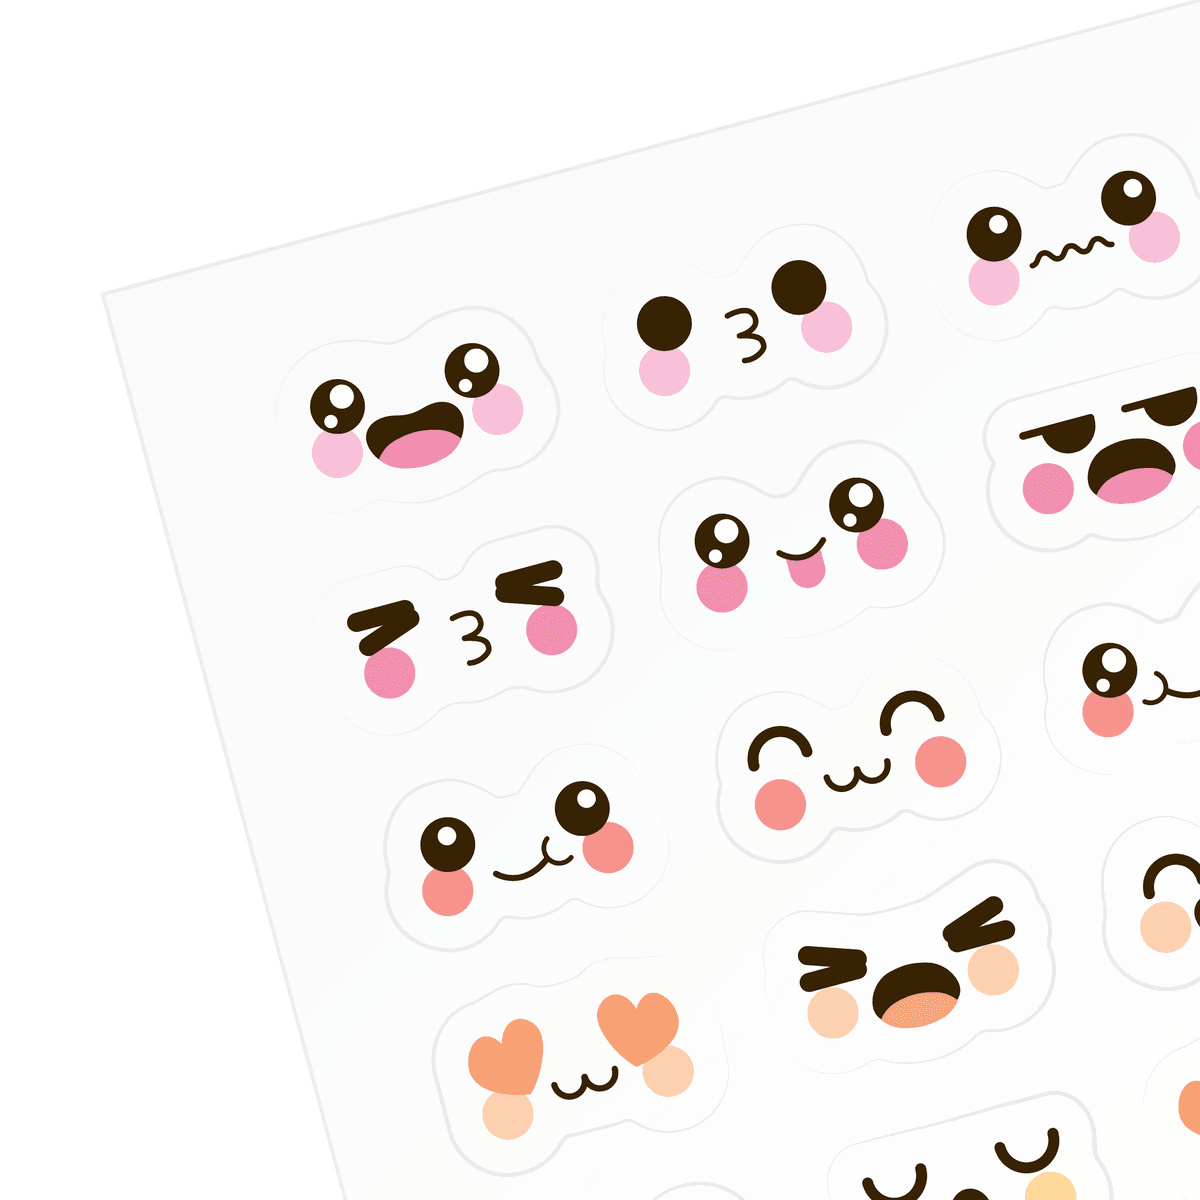 Ooly 120-028 Itsy Bitsy Stickers - Jungle Pals